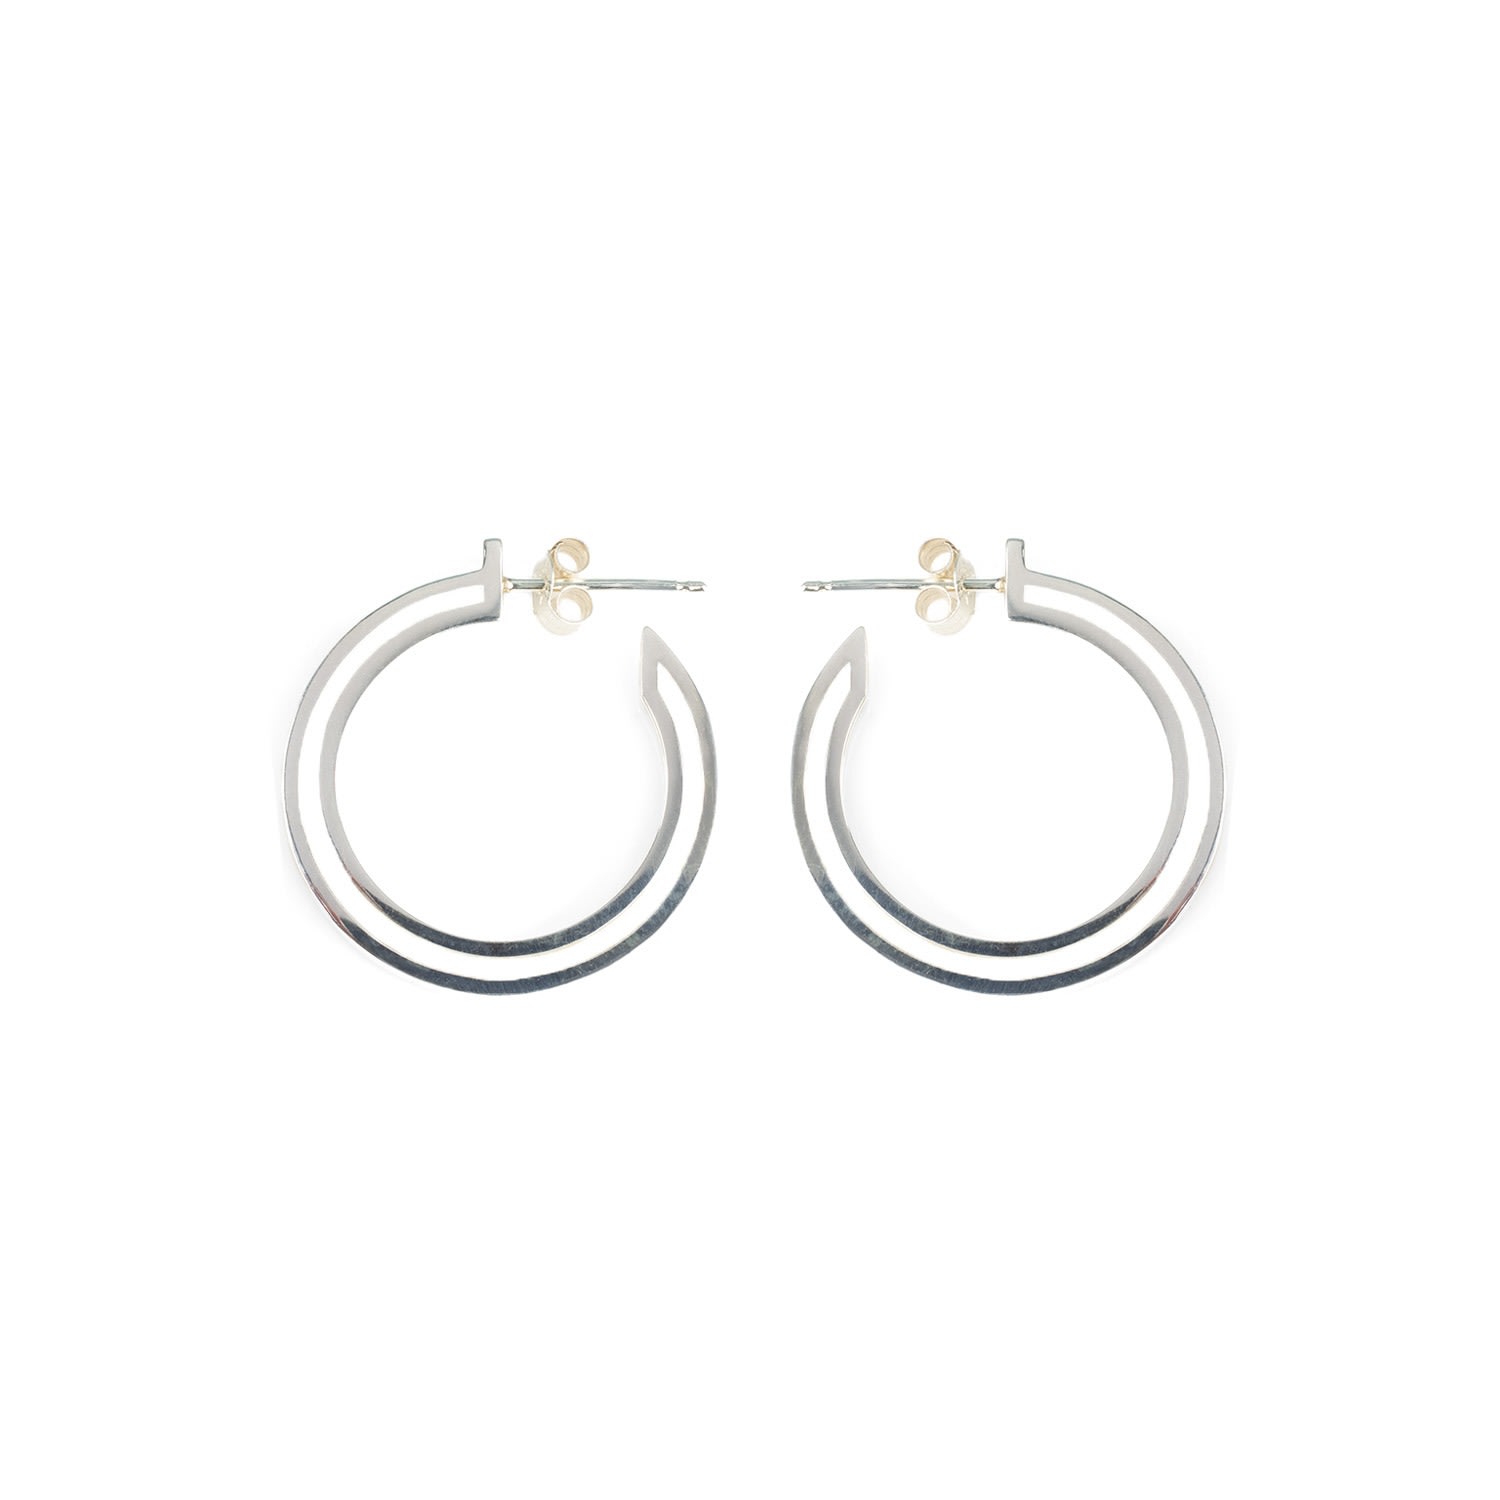 Toolally Women's Small Double Hoops - Silver